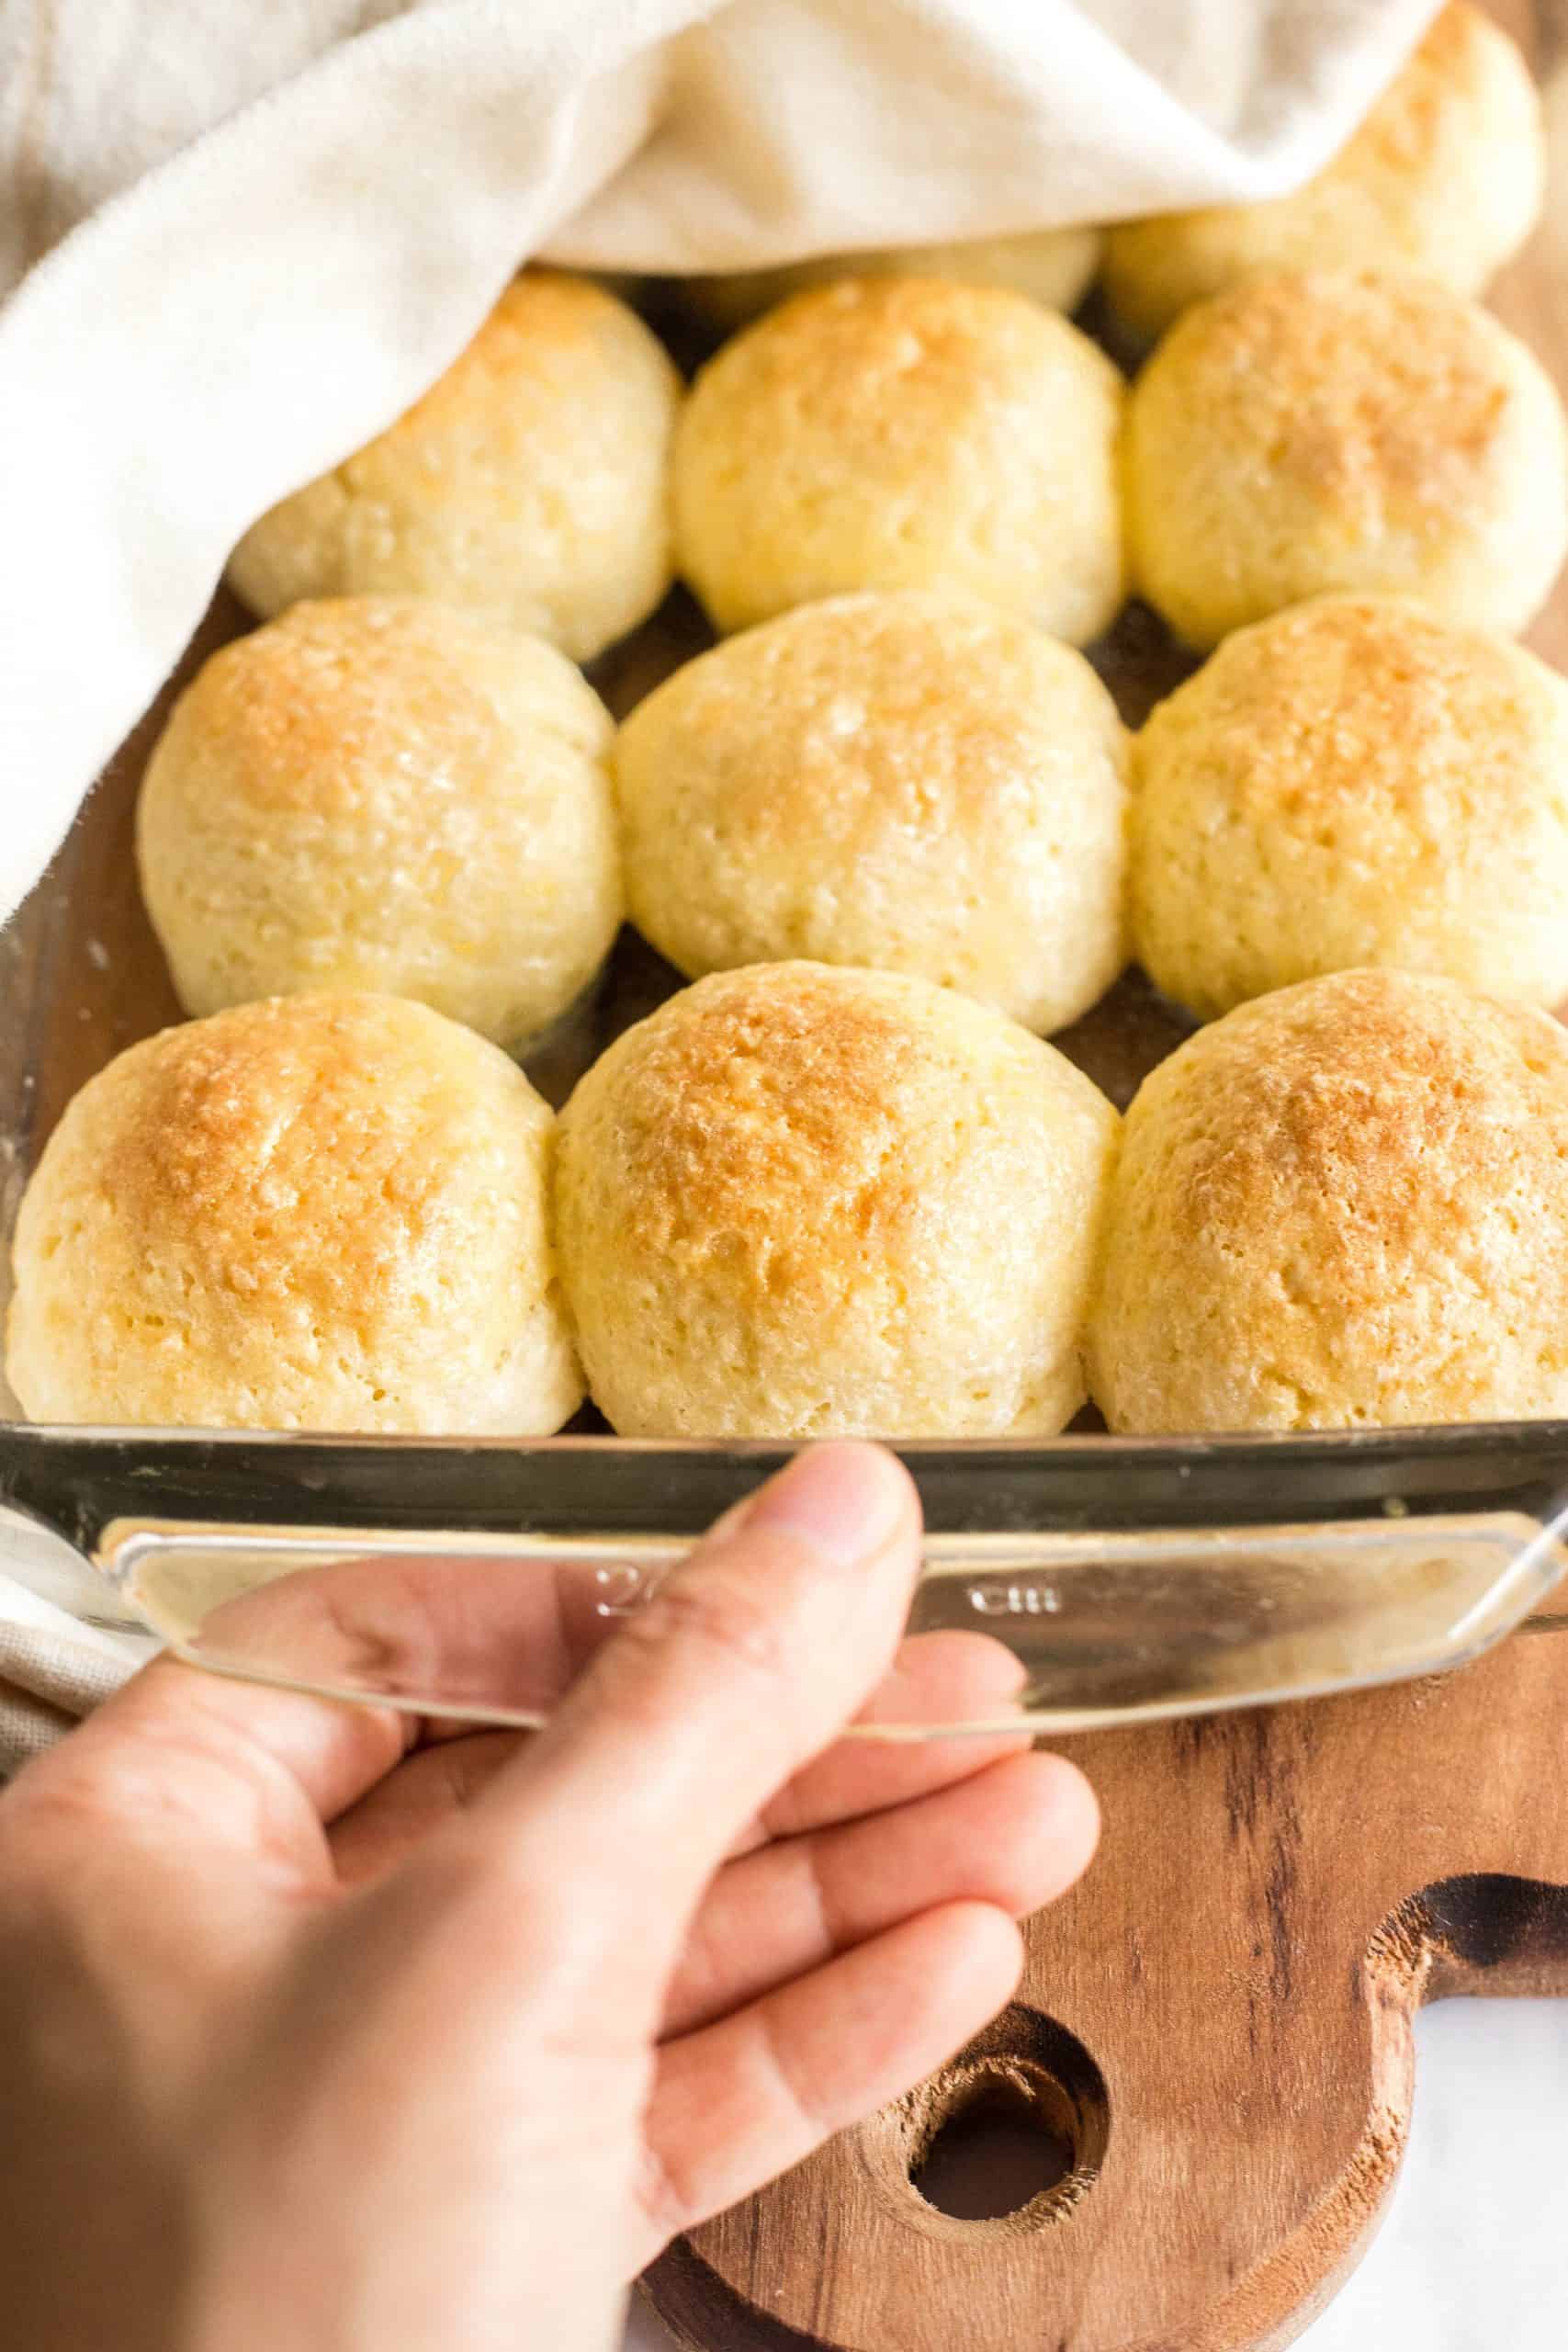 Hand holding a glass pan full of  gluten-free bread rolls.